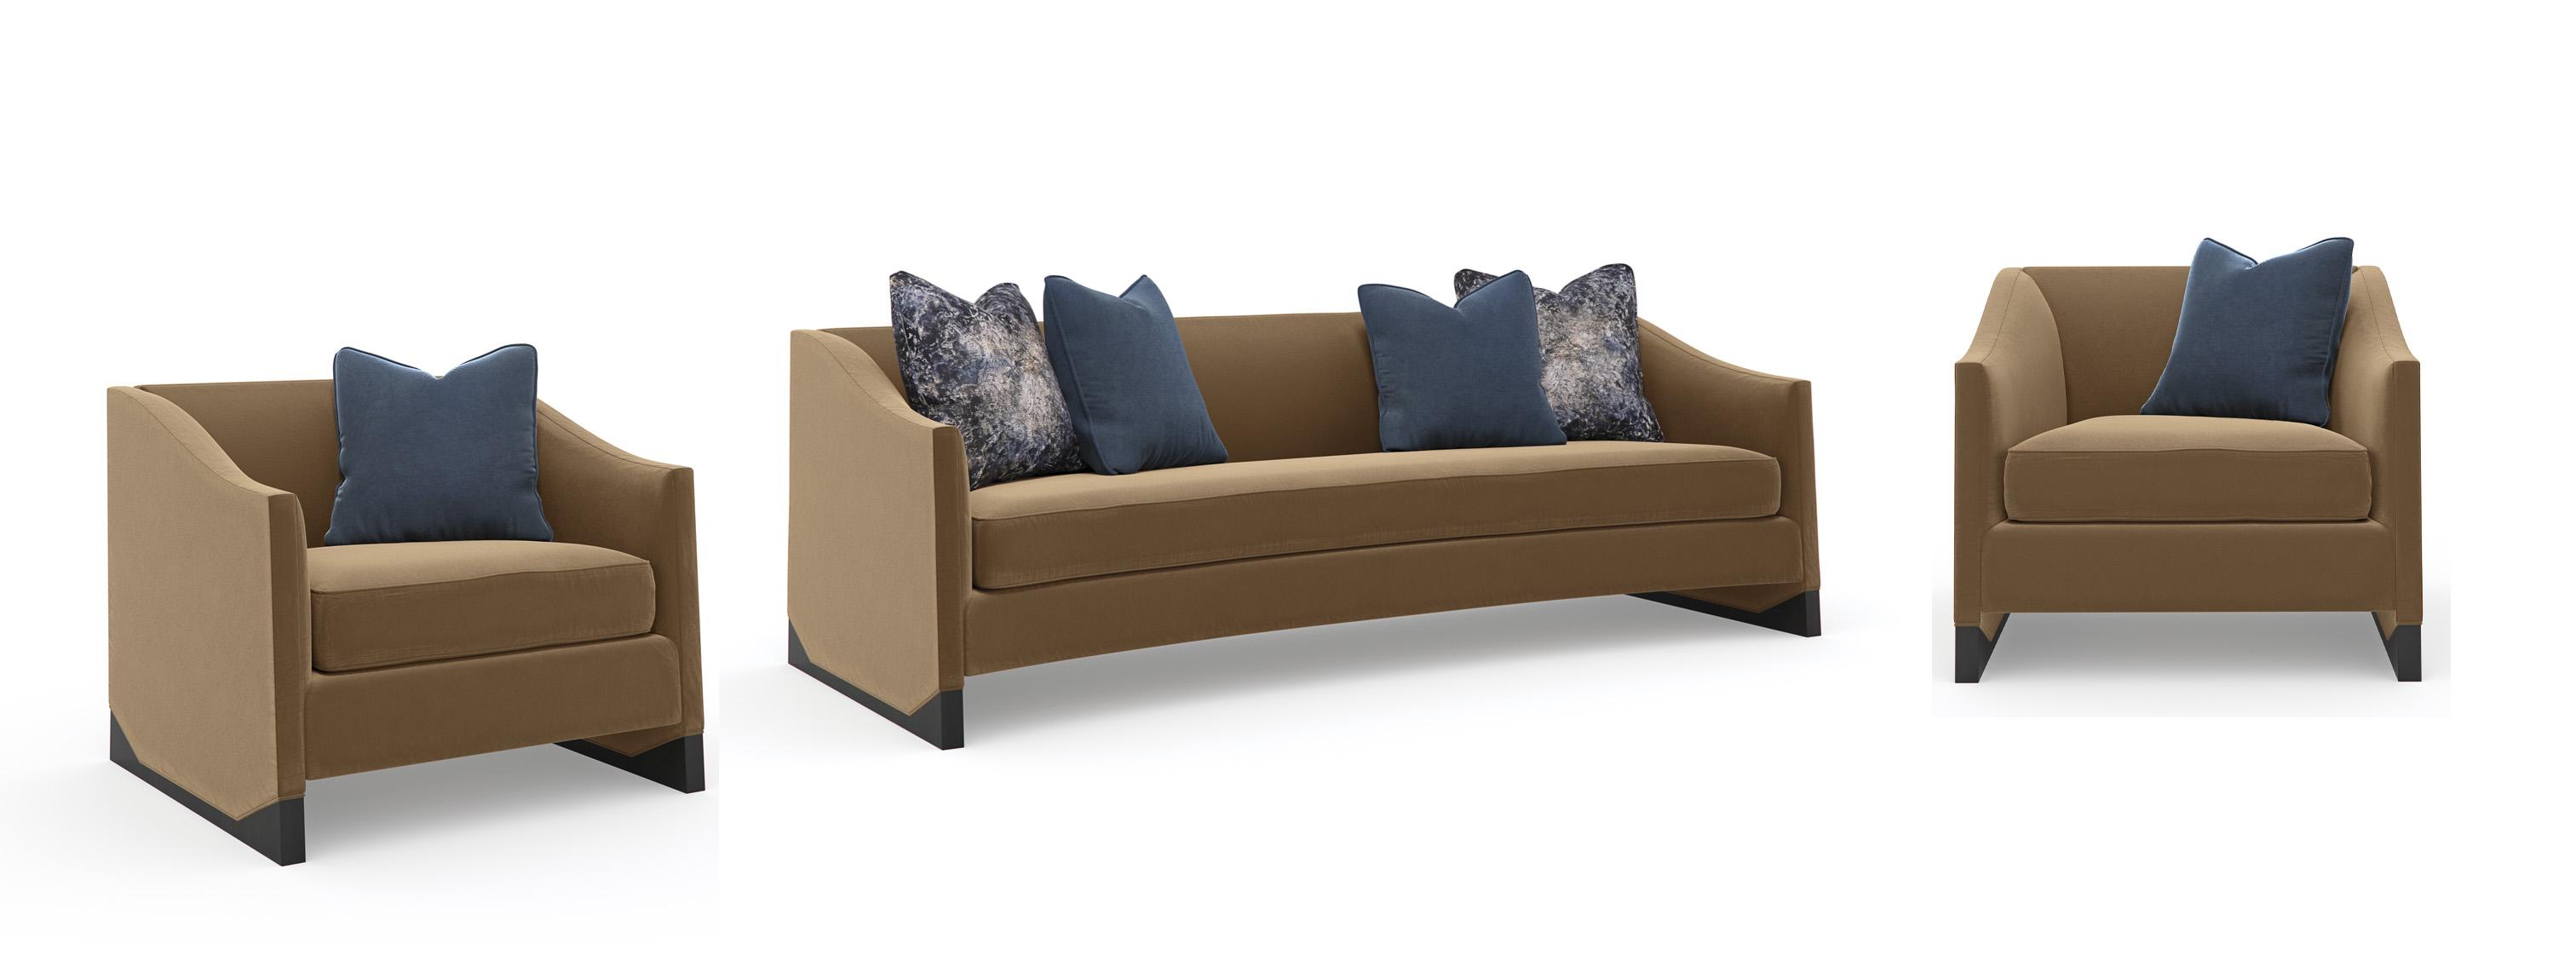 Contemporary Sofa and Chair Base Line Sofa UPH-020-014-A-Set-3 in Camel Fabric